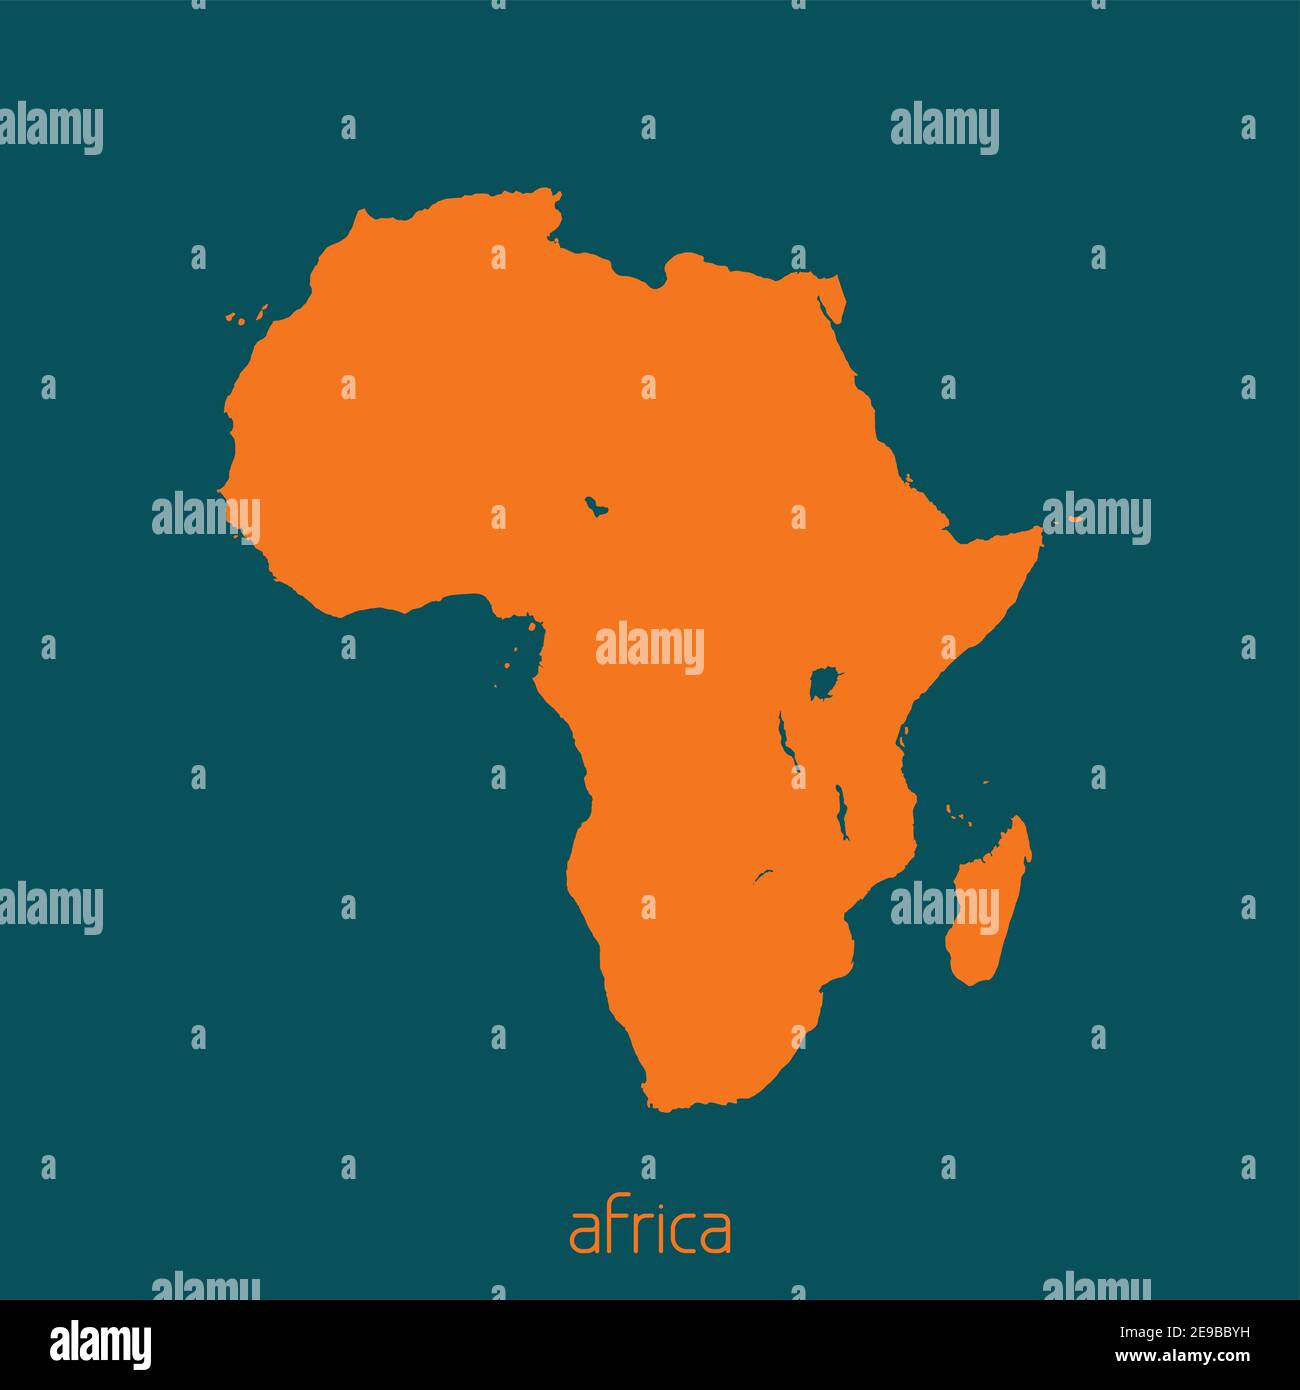 Simple silhouette of the map of Africa on a sherpa blue background. Vector Stock Vector